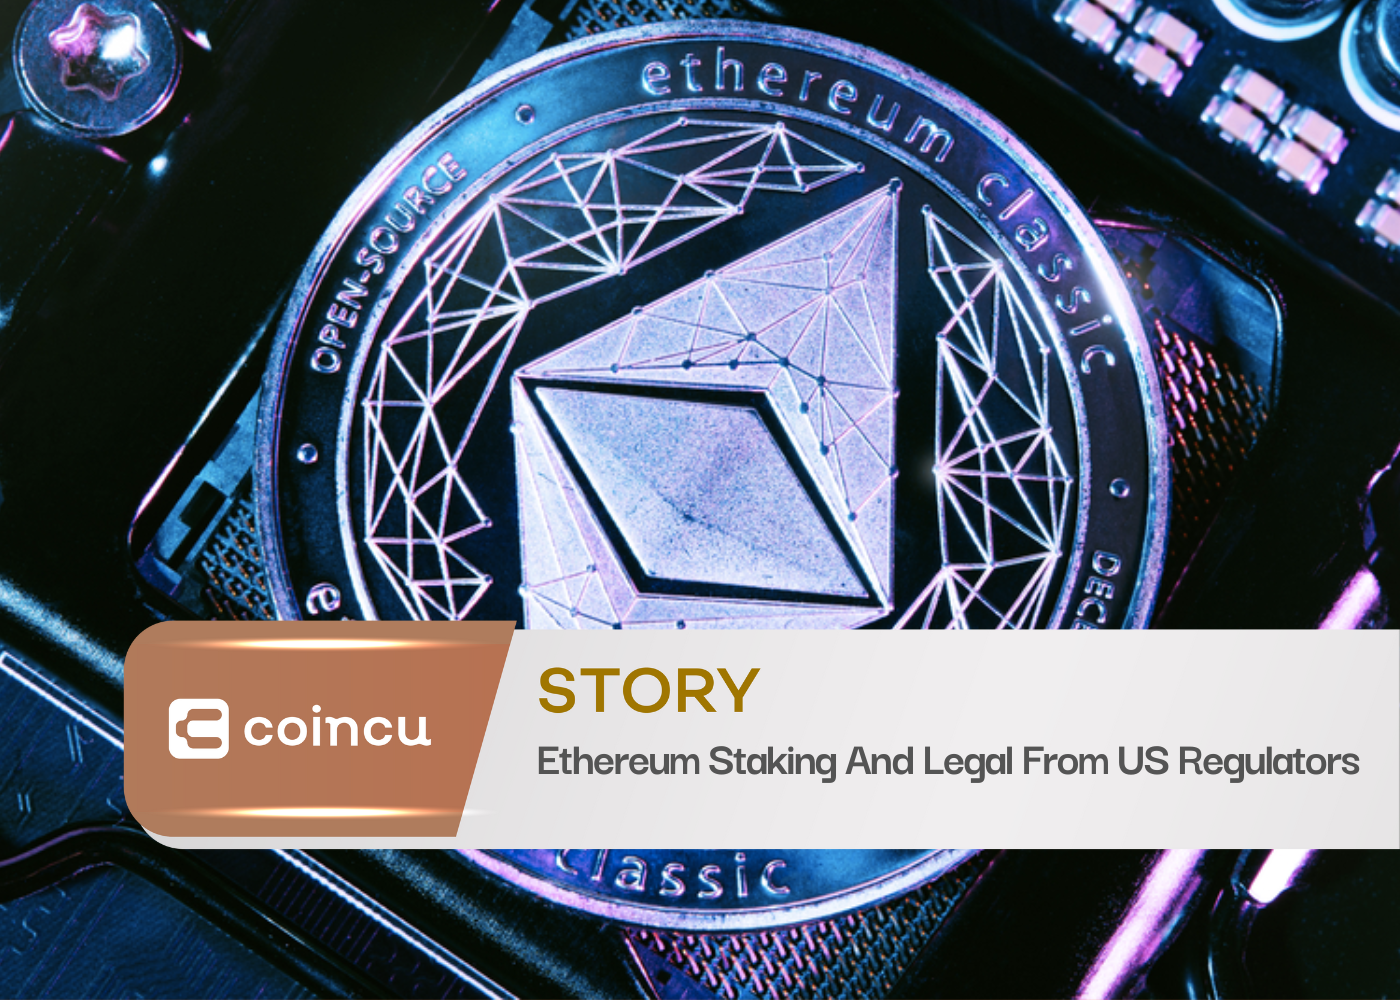 Ethereum Staking And Legal From US Regulators